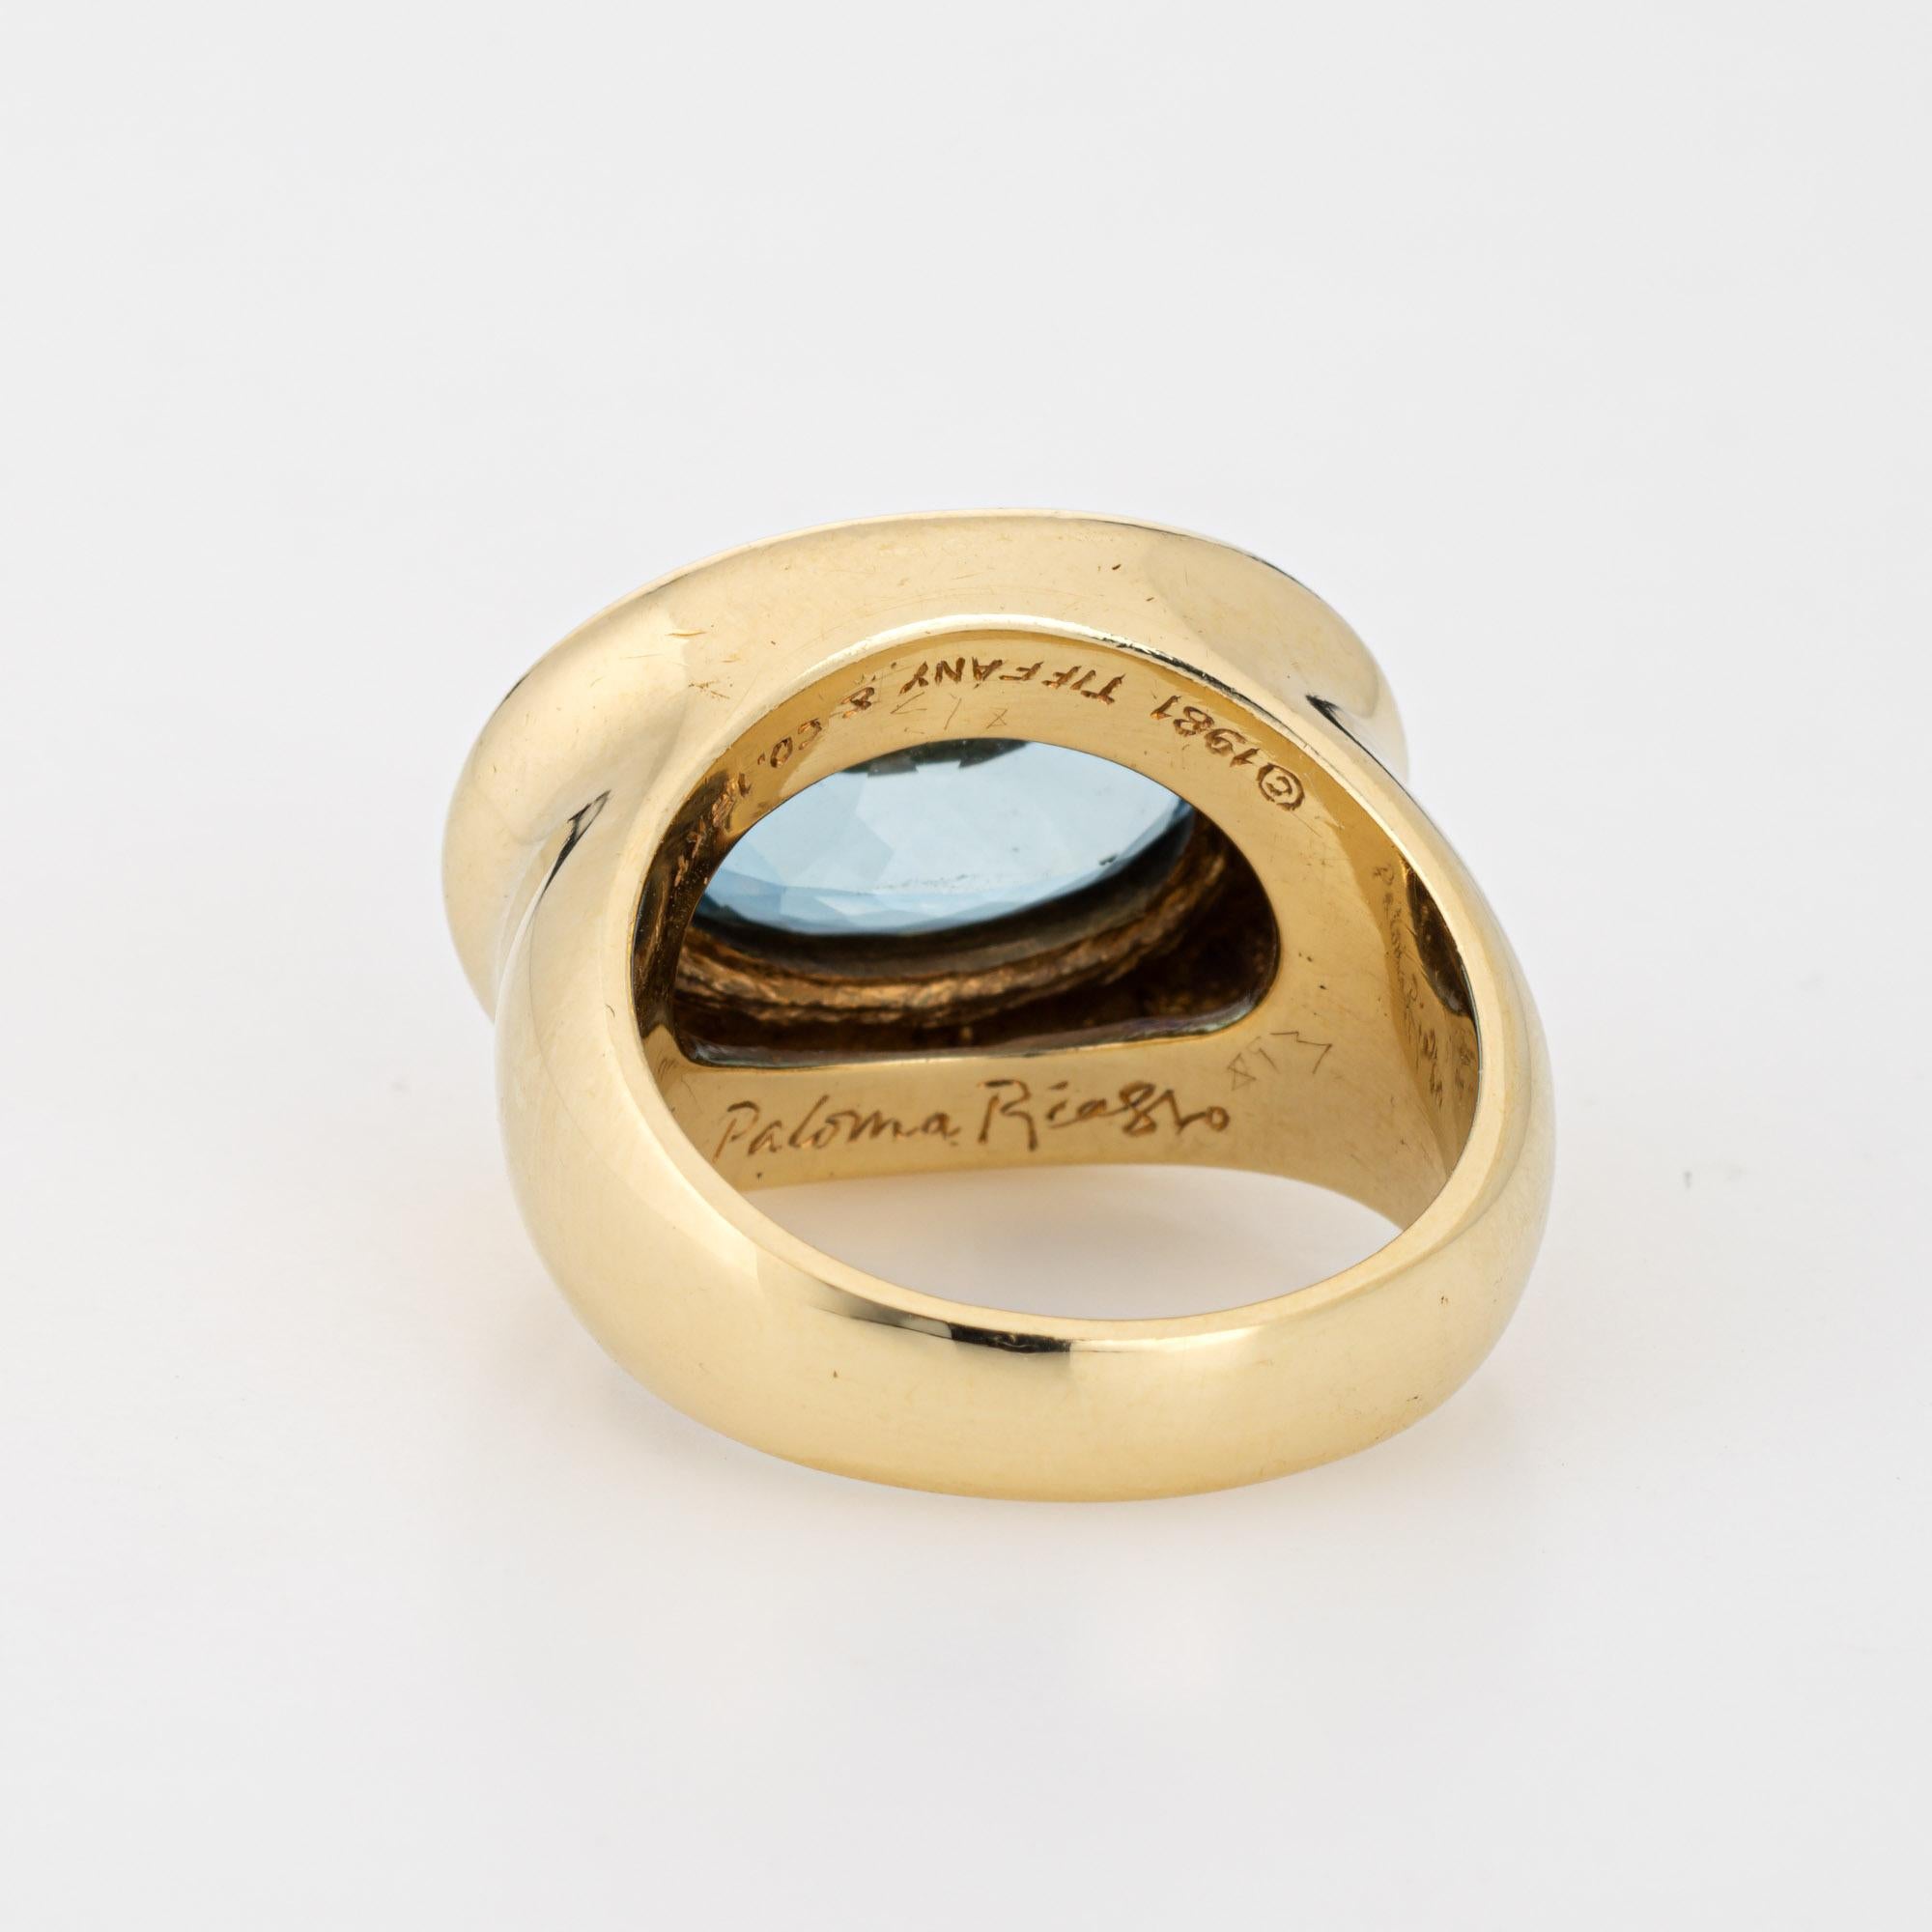 Oval Cut 1981 Tiffany & Co Aquamarine Ring Paloma Picasso Vintage 18k Gold Sz 6.5 For Sale